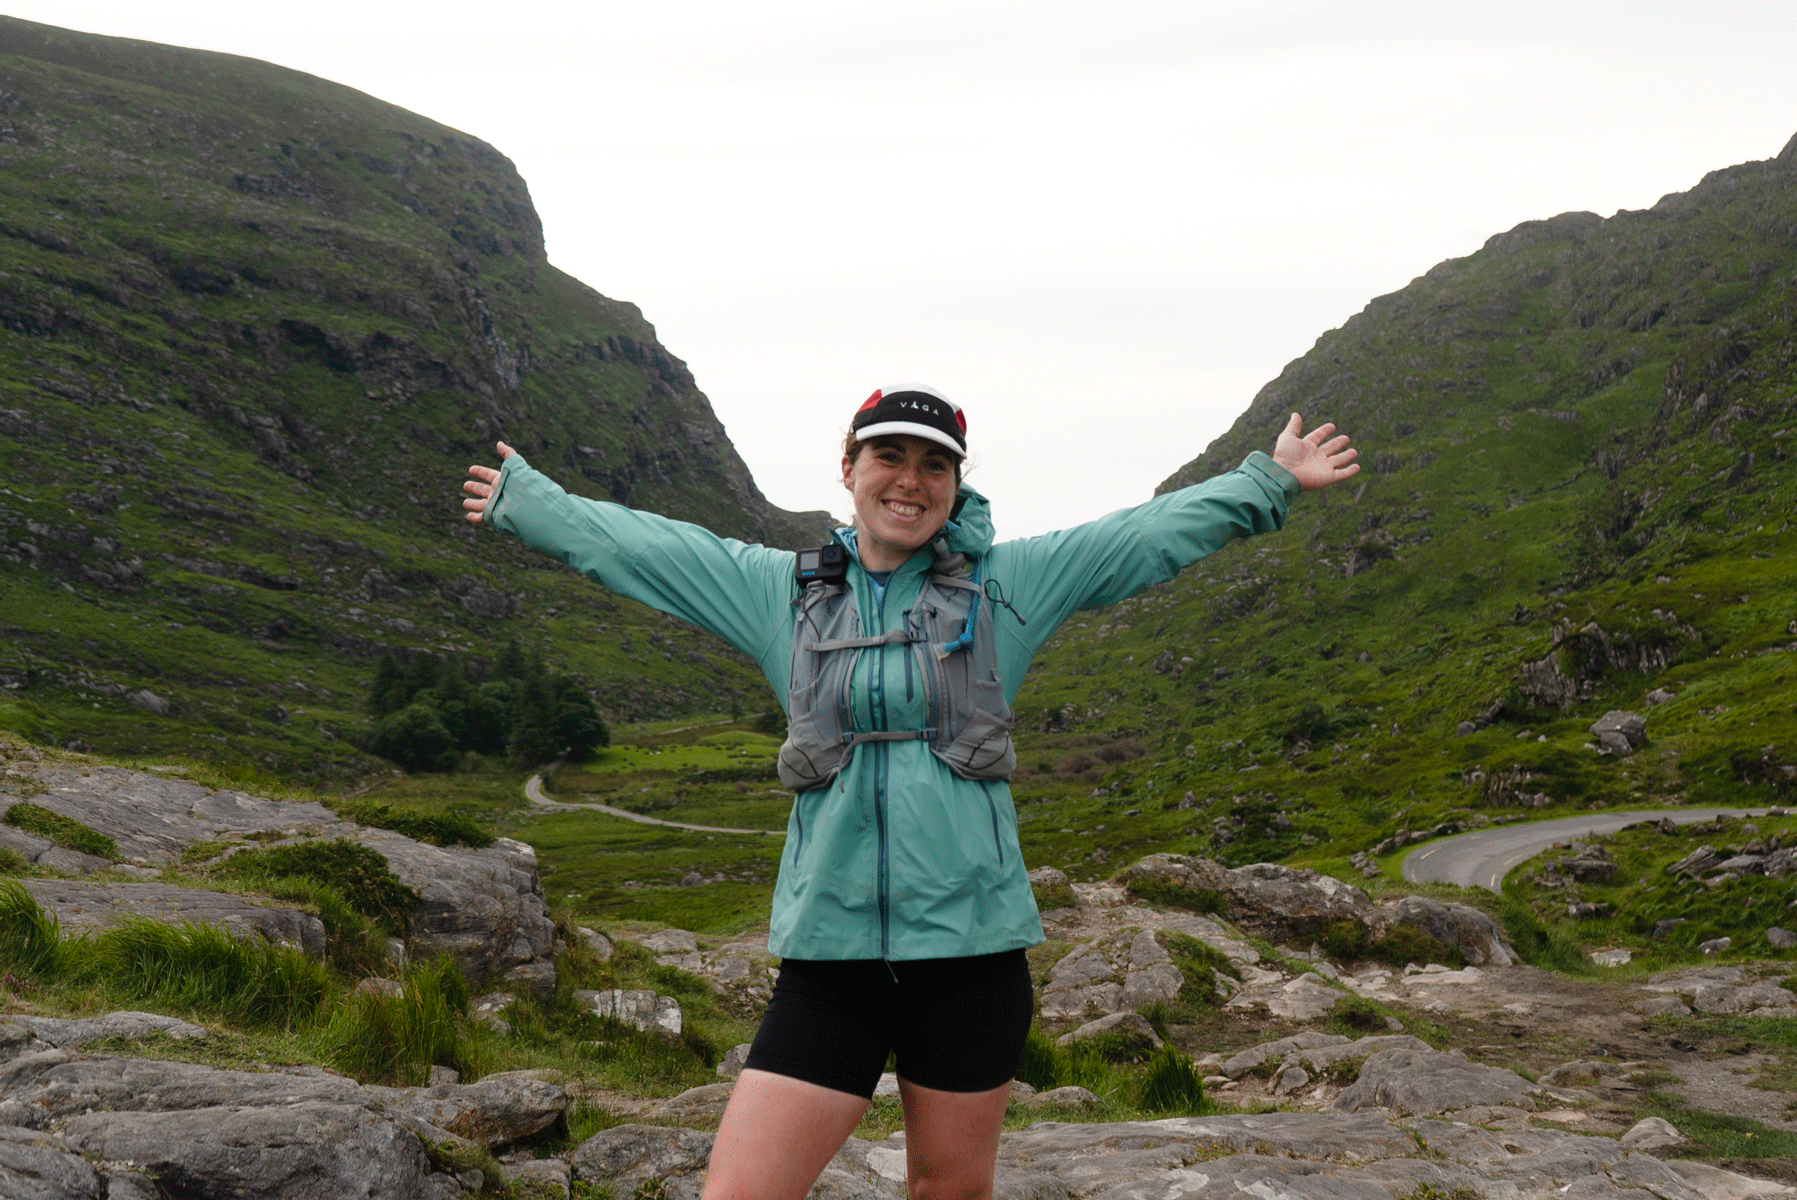 Summiting all 275 of Ireland’s mountains in record time – Ellie Berry